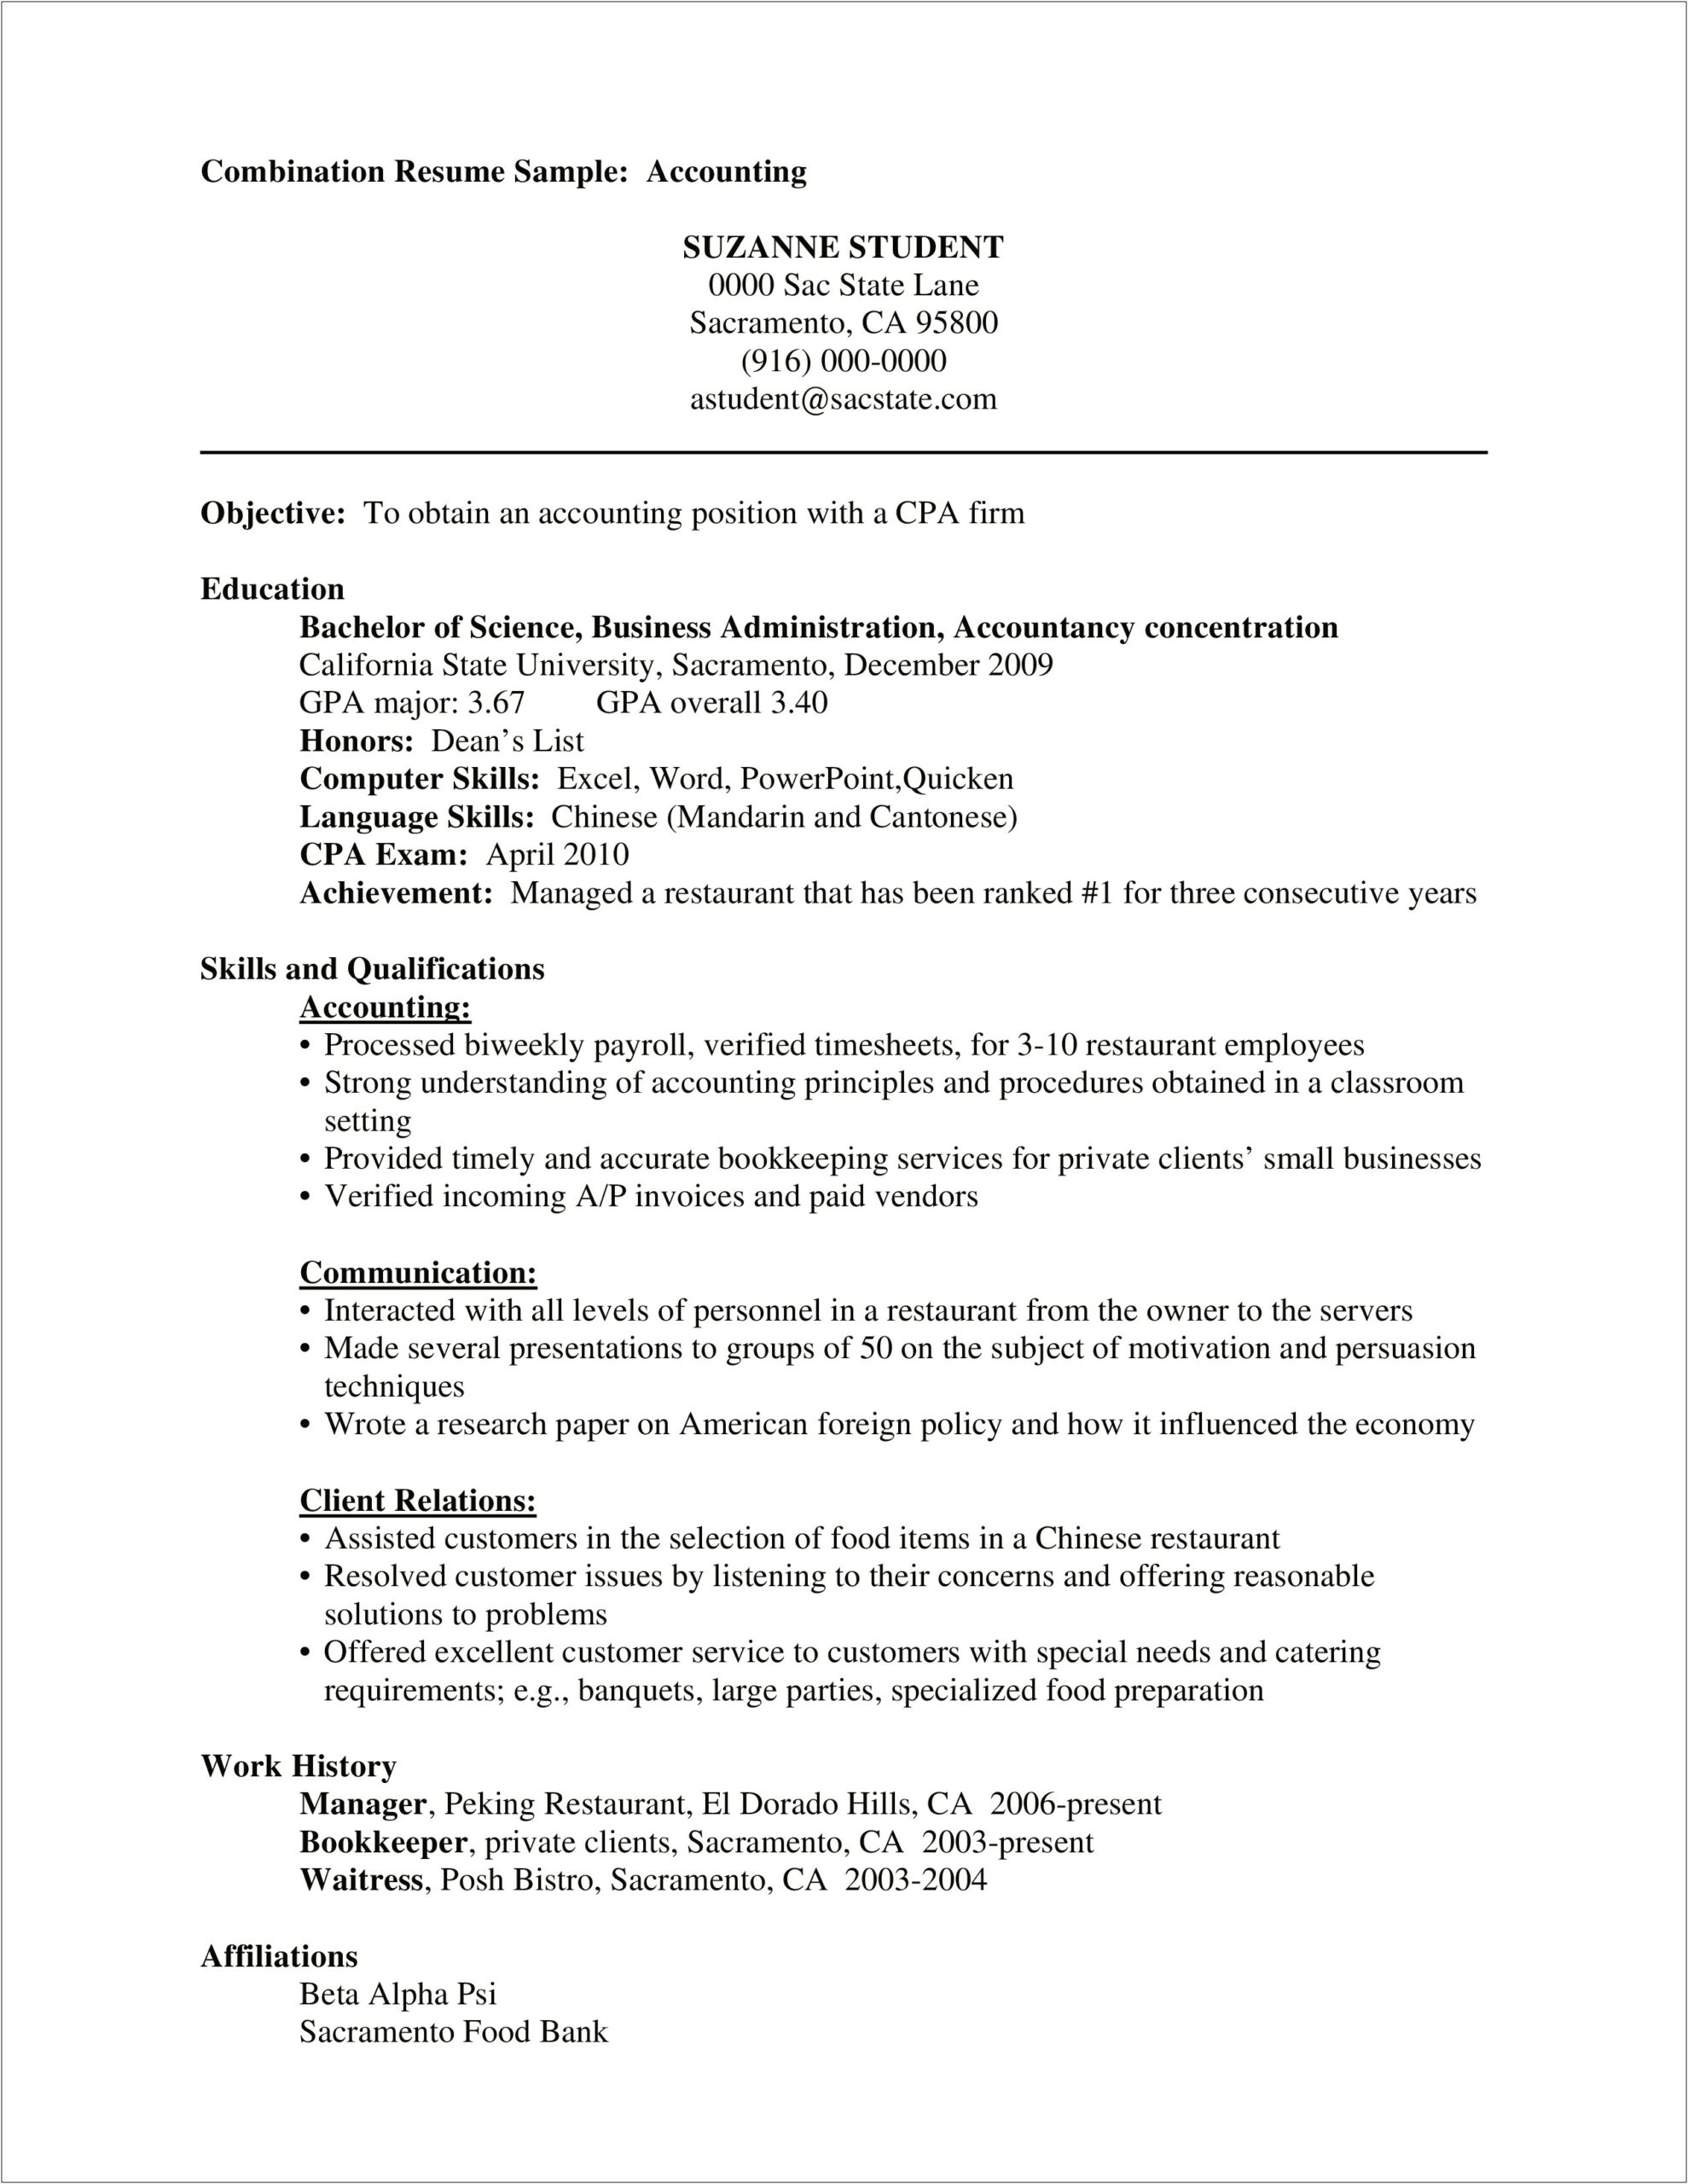 Combination Resume Sample For Students